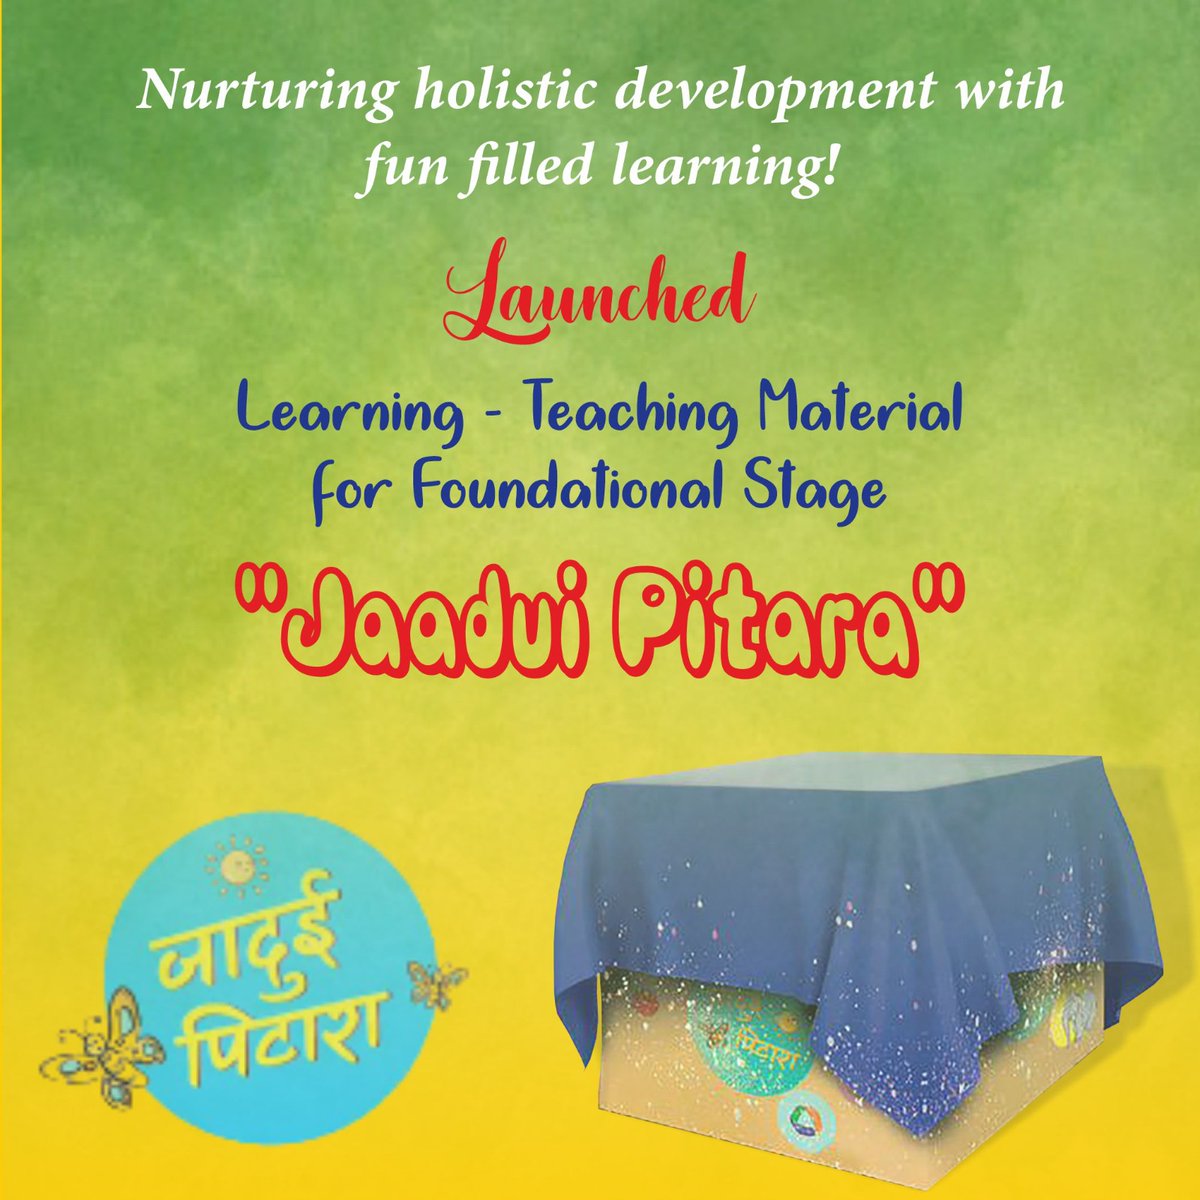 Nurturing holistic development in children through fun filled learning! Learning - Teaching Material for the Foundational Stage (#JaaduiPitara) has been launched today for all round development in learners of age 3 to 8 years, following all major recommendations of #NEP2020.